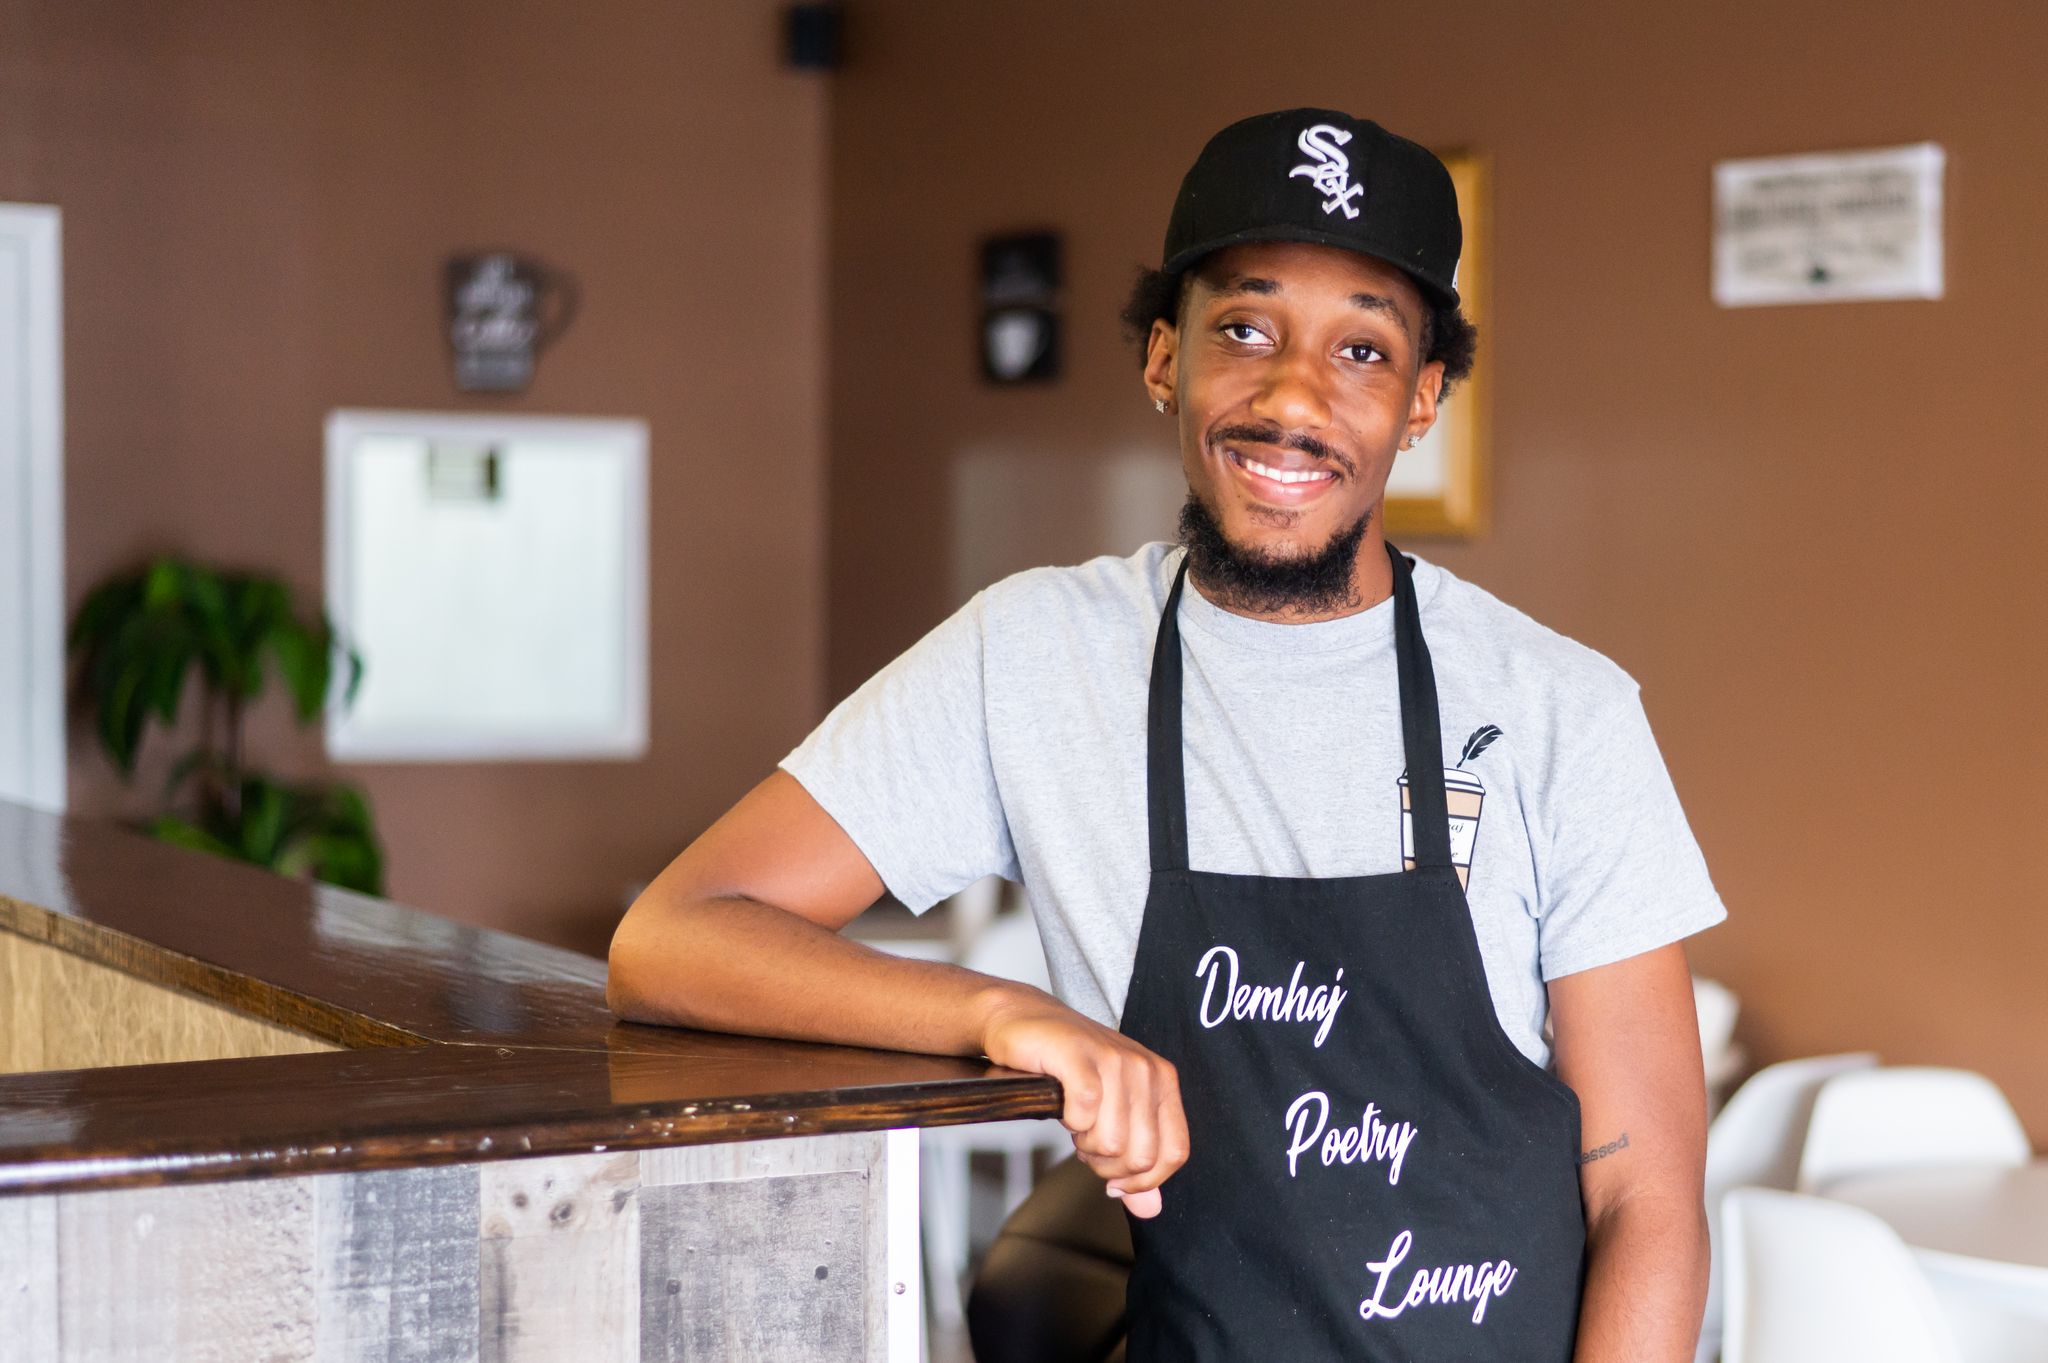 Jahmed Williams, son of Demhaj Poetry Lounge owner, Bridgette stands at the coffee shop counter.